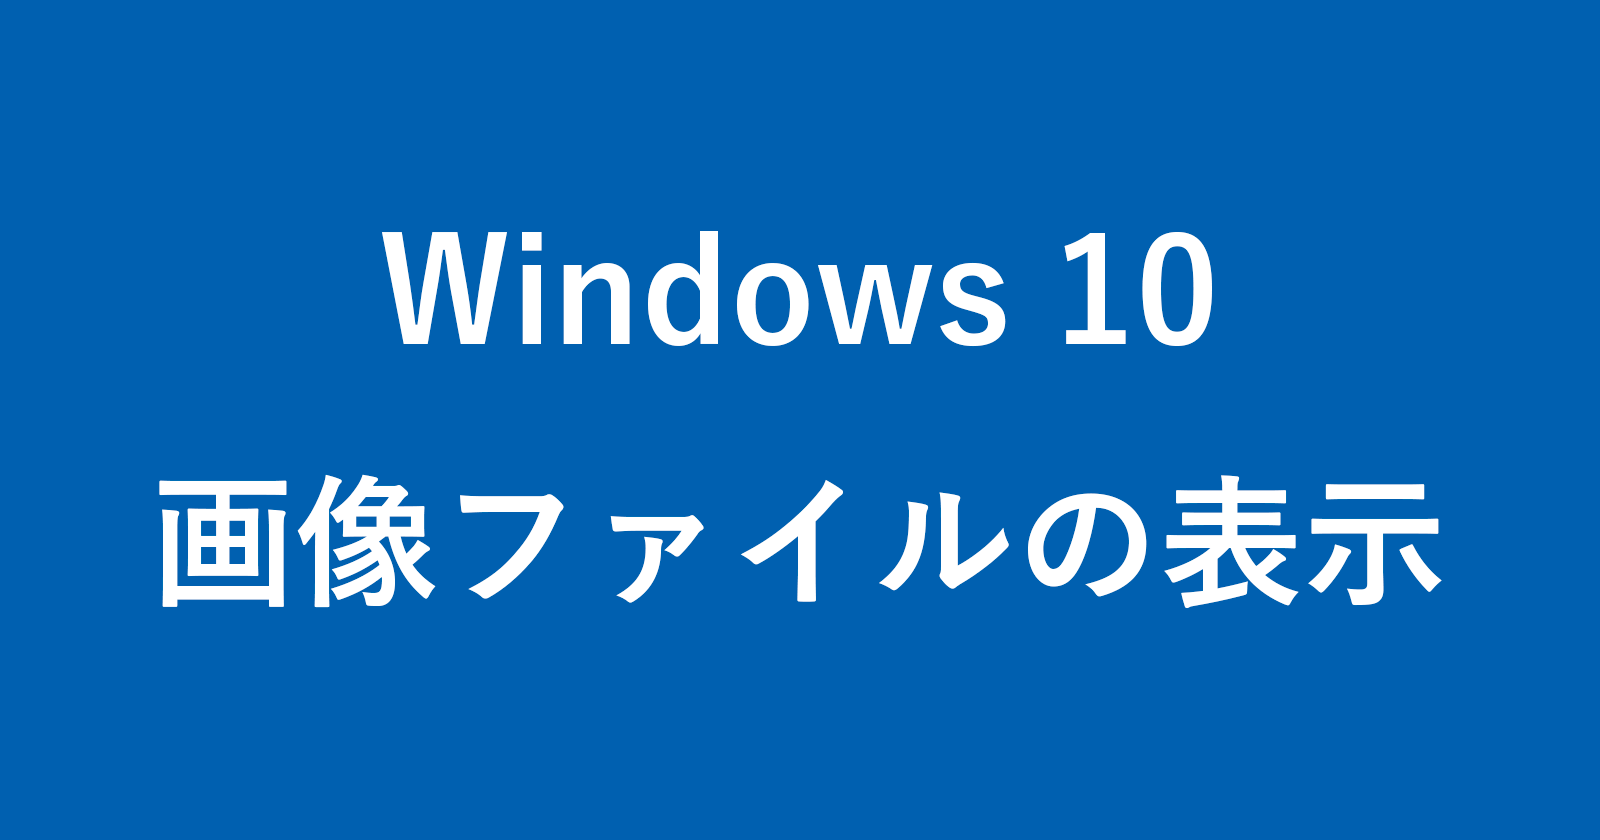 windows 10 picture thumbnail preview